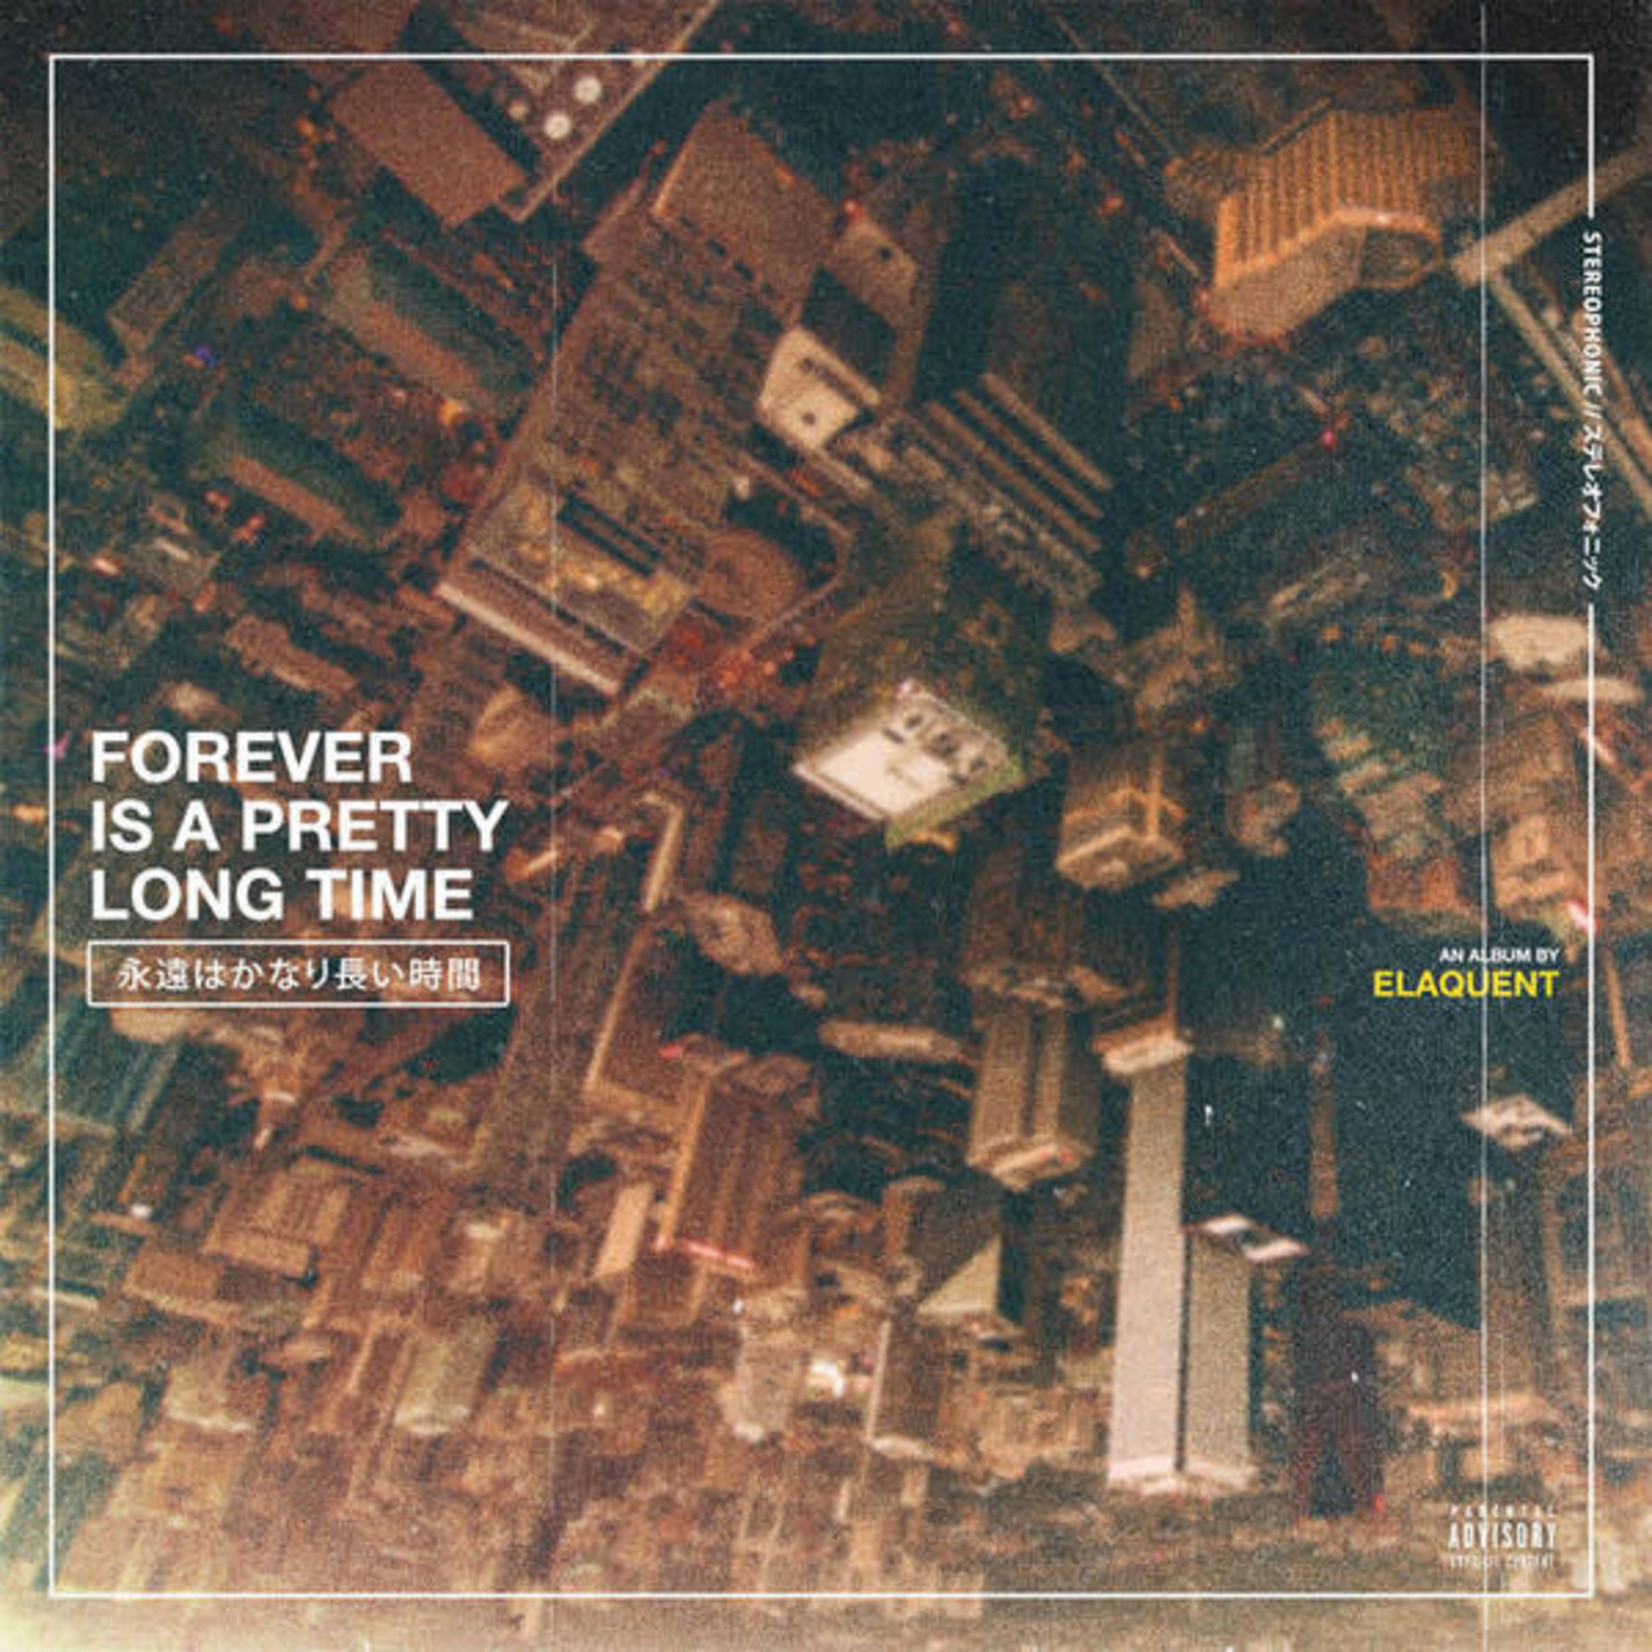 Mello Music Group Elaquent - Forever Is A Pretty Long Time (LP) [Yellow/Black]